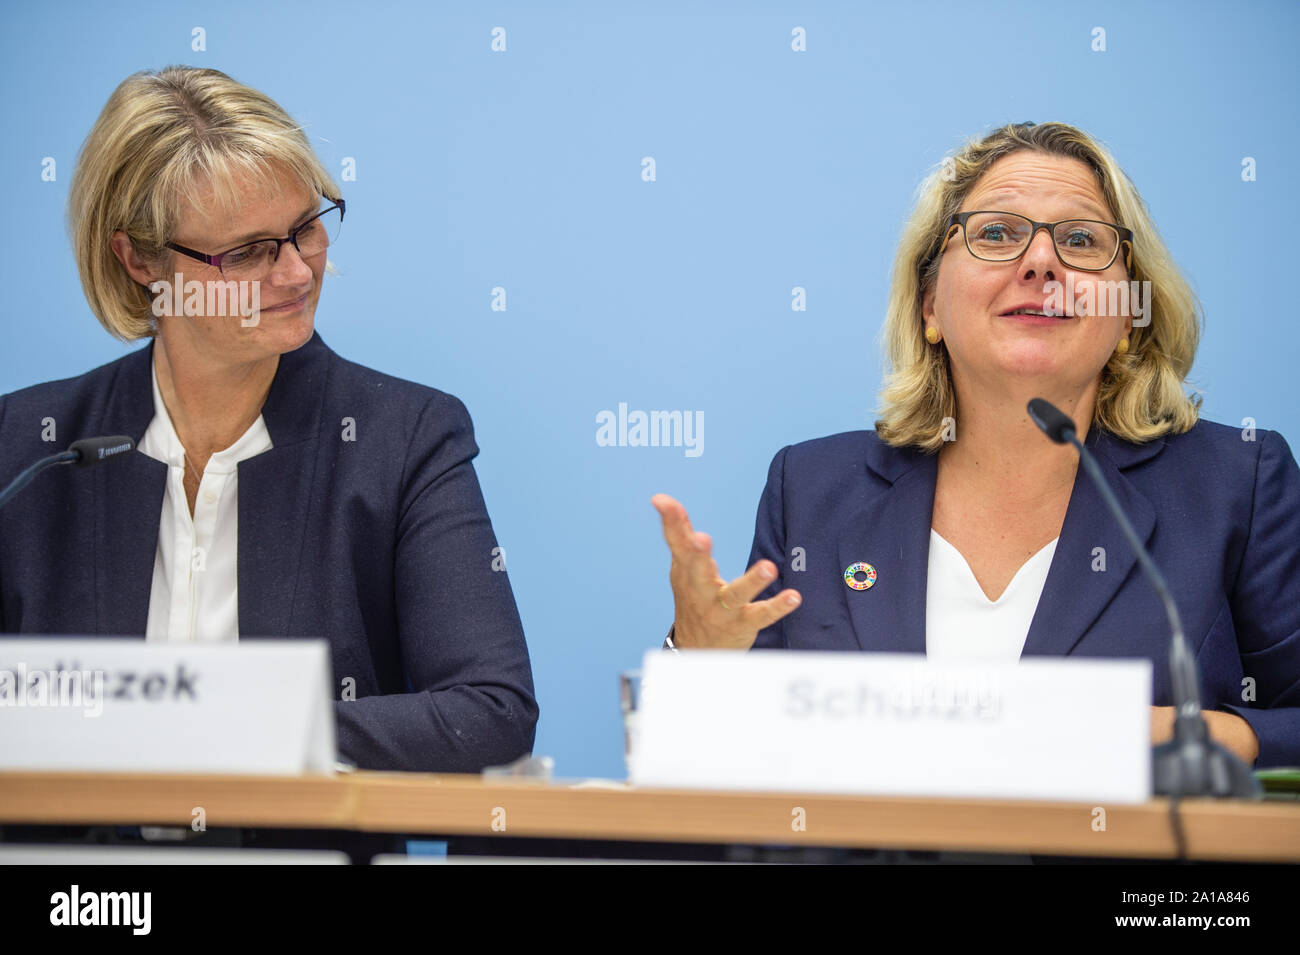 25 September 2019, Berlin: Svenja Schulze (r, SPD), Federal Environment Minister, and Anja Karliczek (l, CDU), Federal Minister of Education and Research, speak at a press conference at the Federal Ministry of Research and Education on the Special Report of the Intergovernmental Panel on Climate Change (IPCC) presented in Monaco on Wednesday. Researchers address the impact of climate change on oceans and ice areas and the consequences for human society. Photo: Arne Immanuel Bänsch/dpa Stock Photo